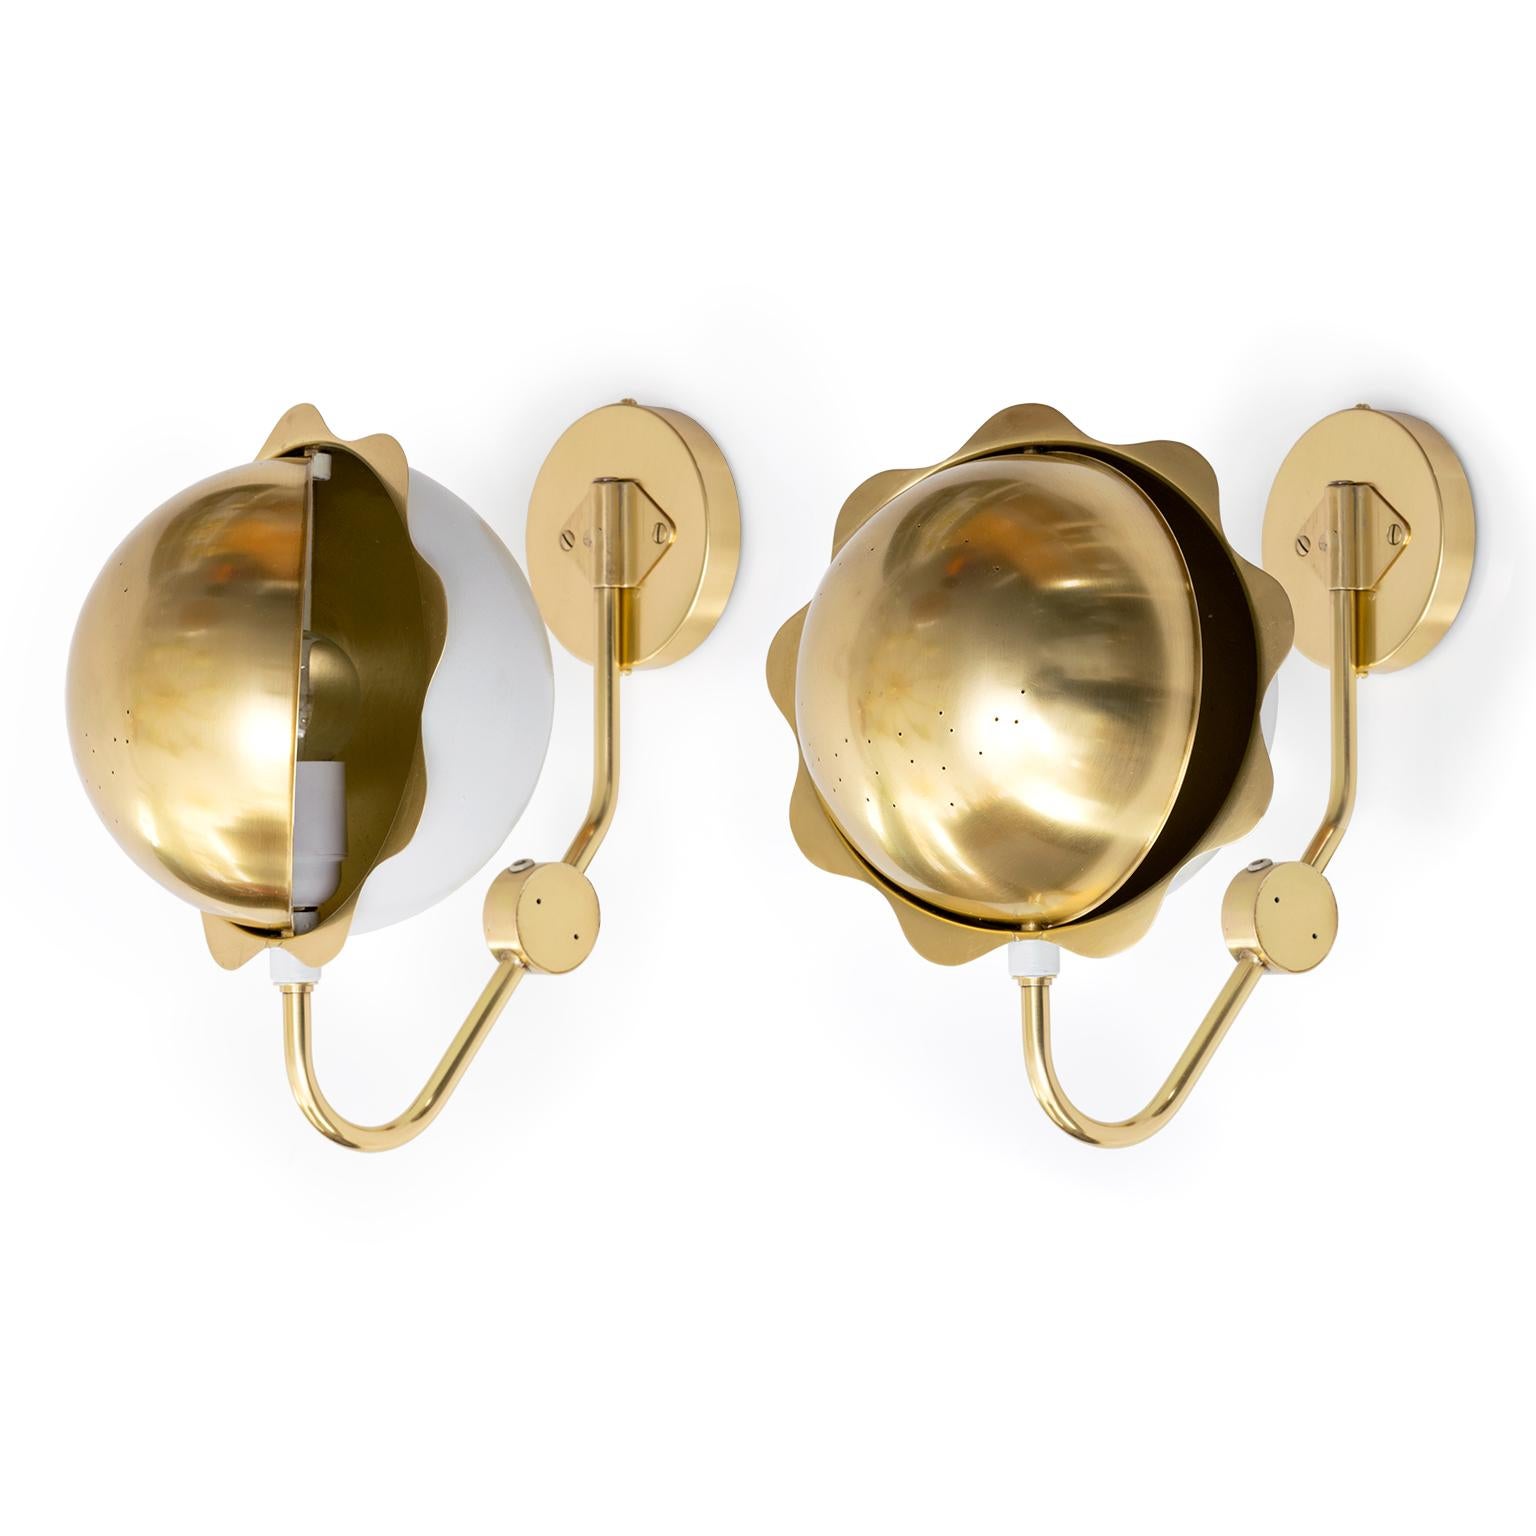 Edvard Hagman AB pair of Eclipse sconces with adjustable shade and rotatable sphere. Newly polished and lacquered the pair have been wired for use in the USA and are mountable to a standard J-box. The sconces are made in Sweden, circa